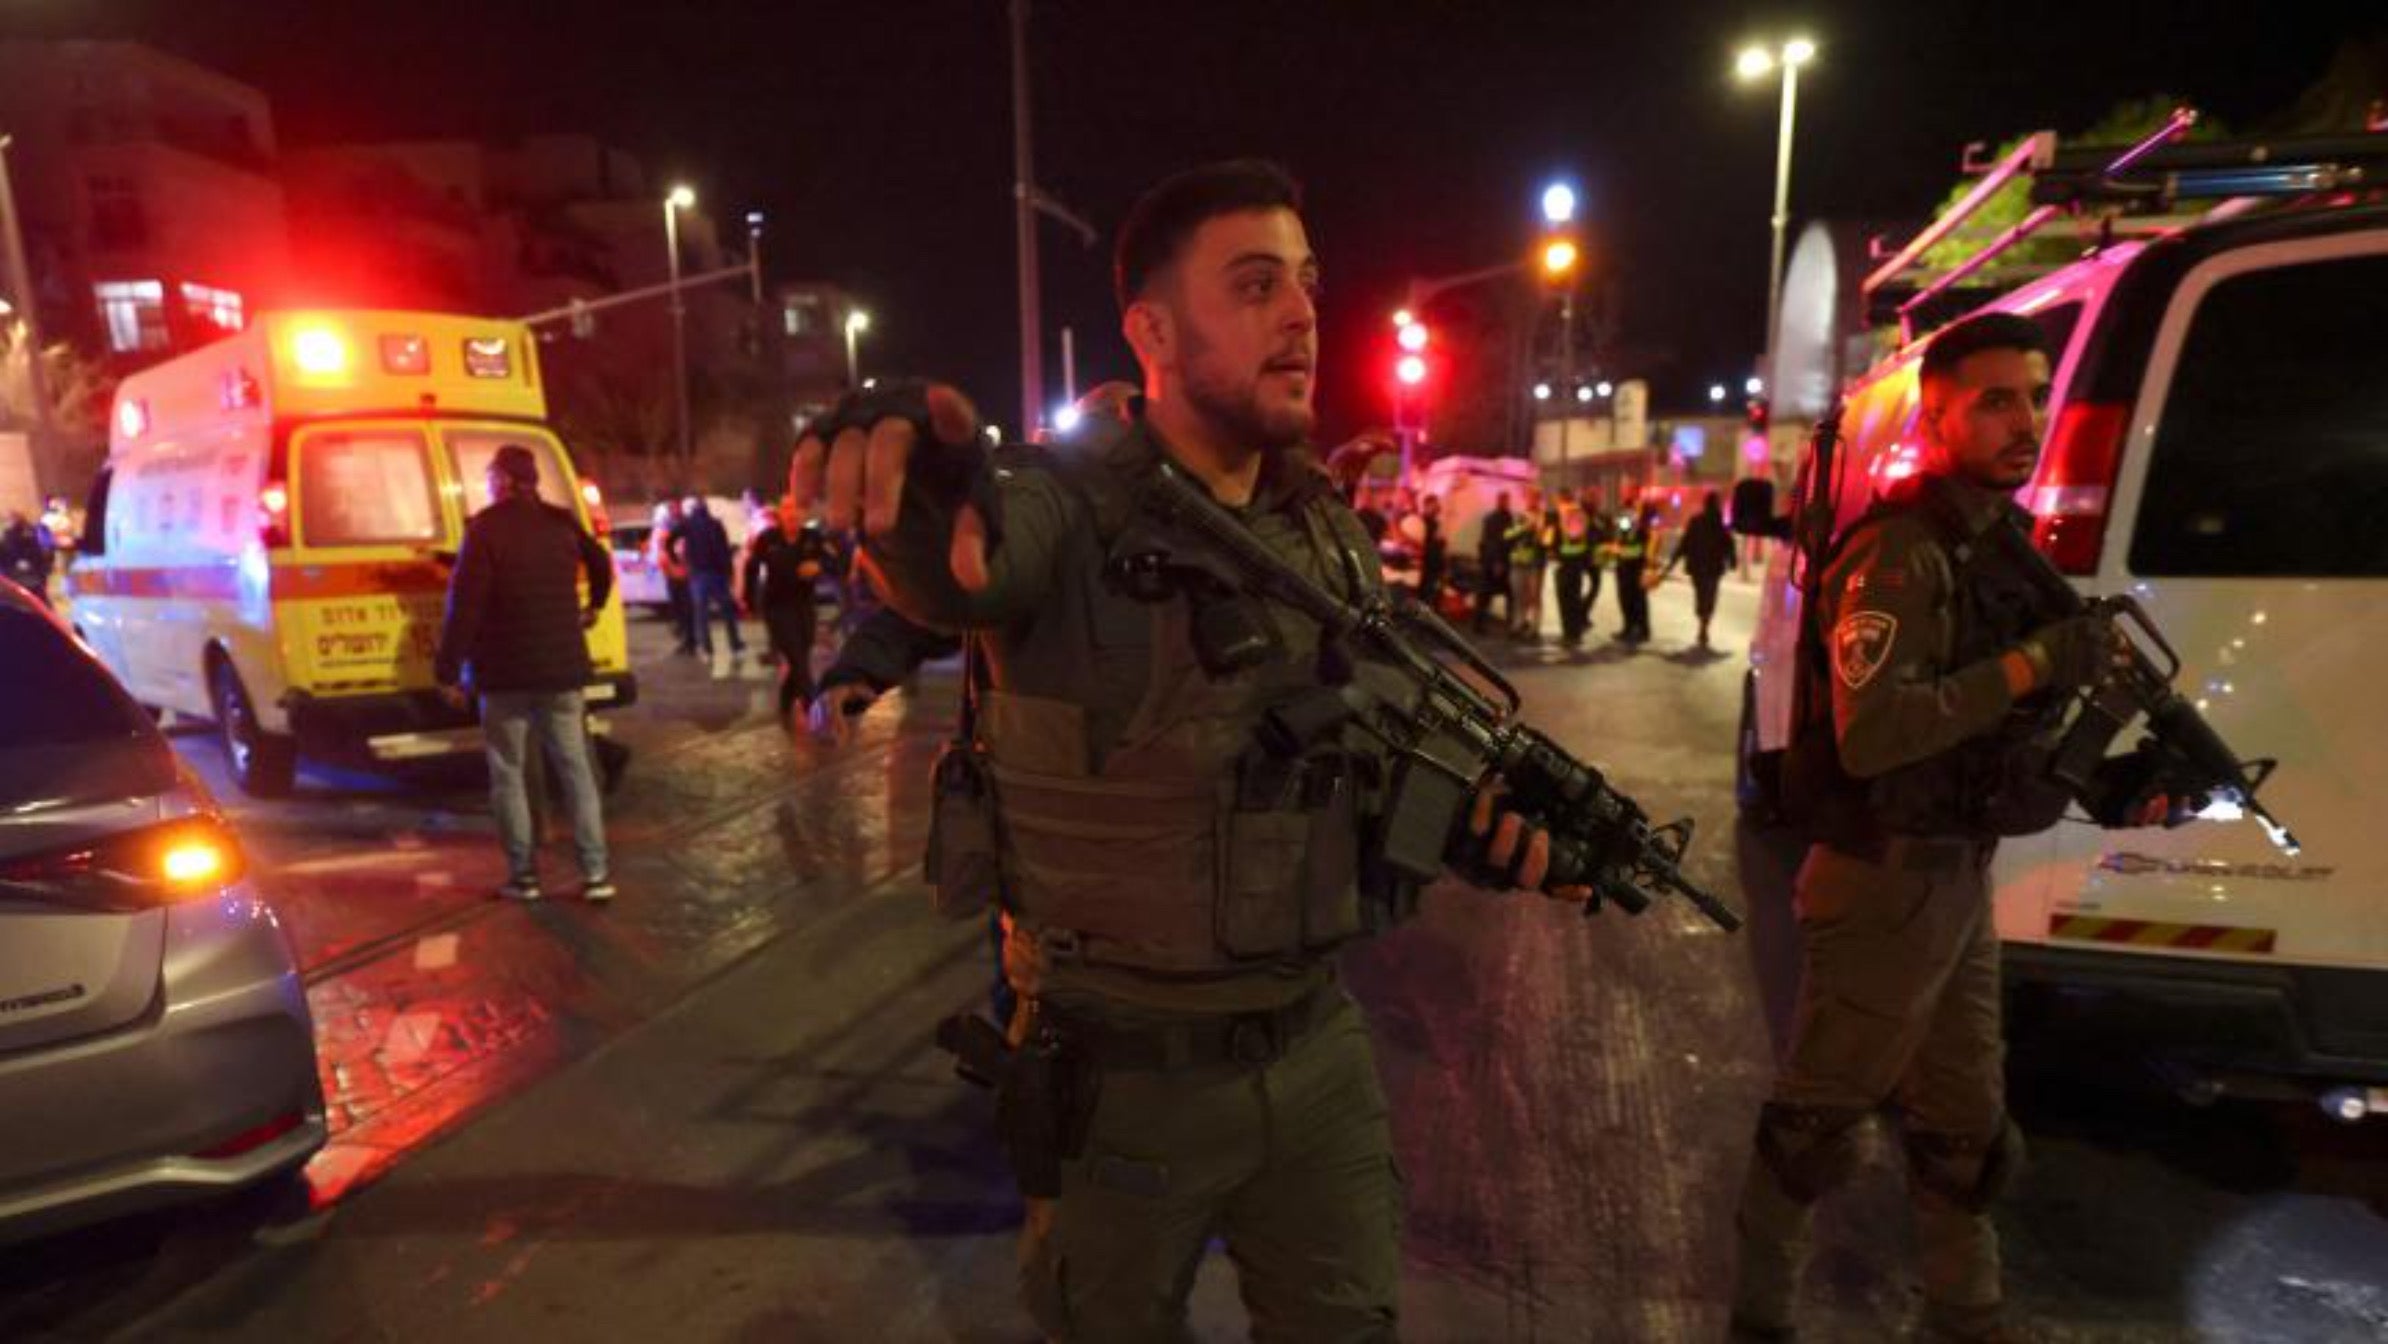 Seven dead and several wounded in a shooting near a synagogue in East Jerusalem, police say terrorist attack, Magnate Daily